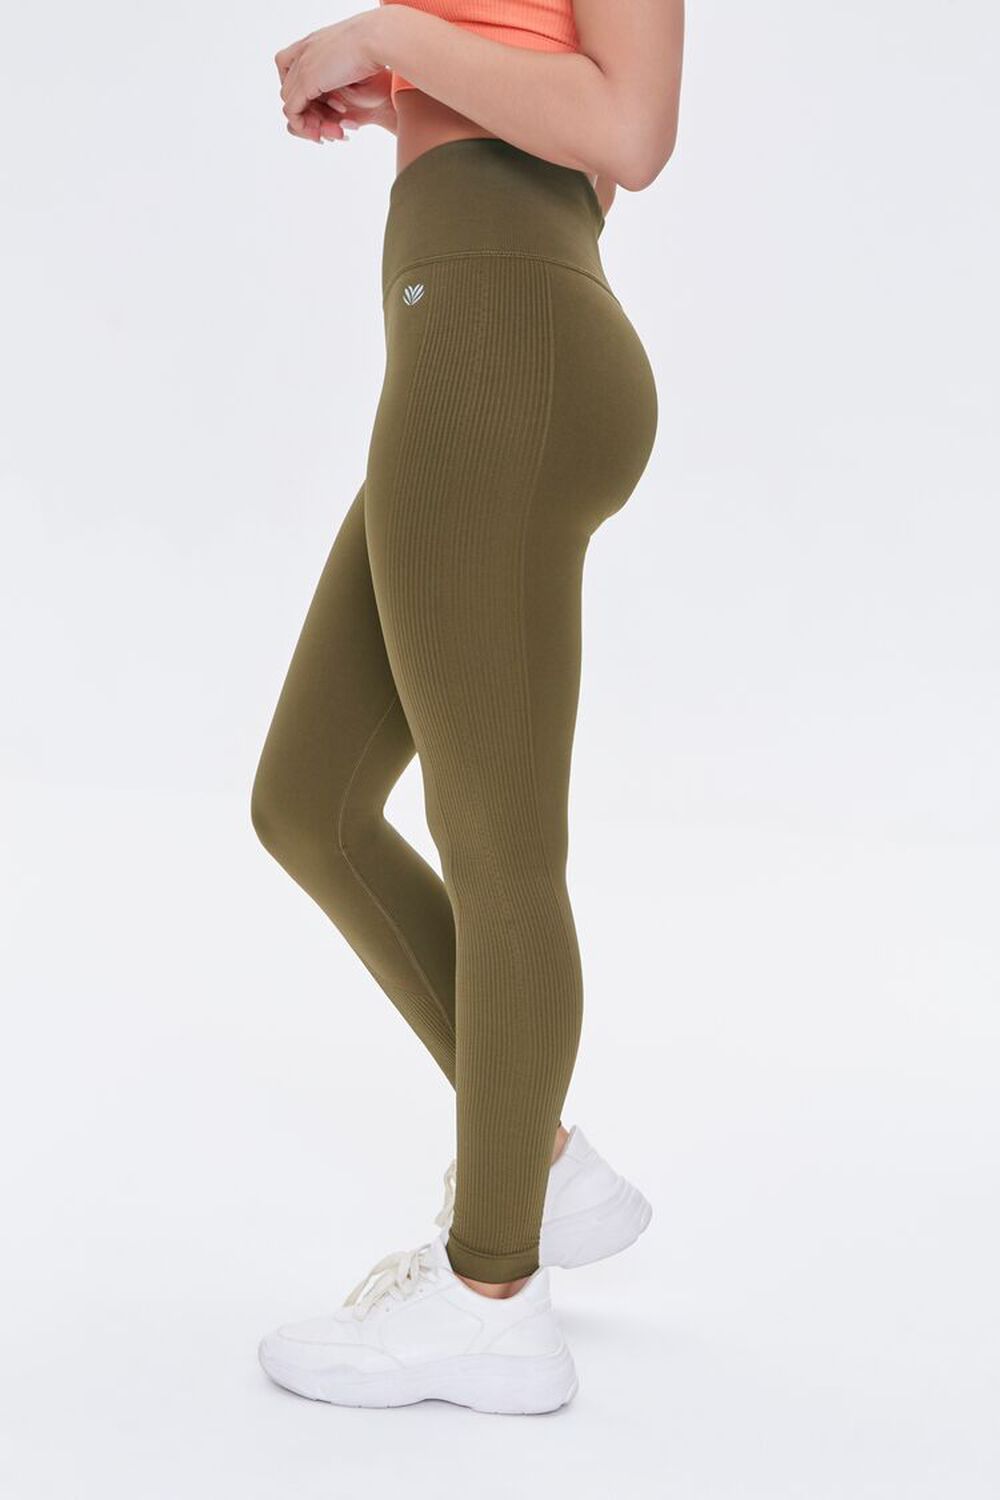 OLIVE Active Seamless High-Rise Leggings, image 3